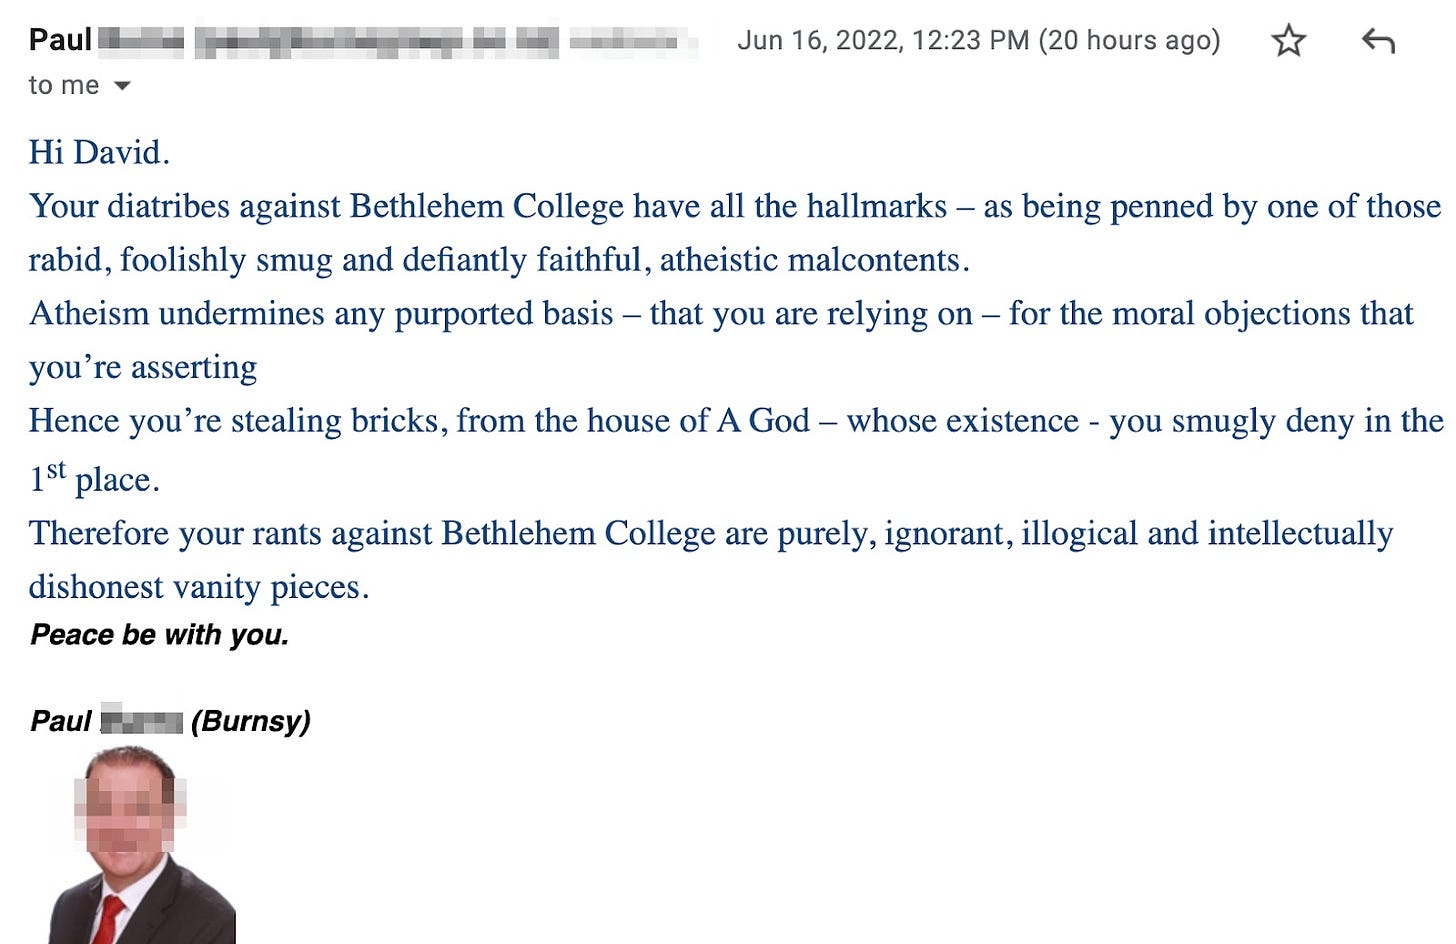 Hi David. Your diatribes against Bethlehem College have all the hallmarks – as being penned by one of those rabid, foolishly smug and defiantly faithful, atheistic malcontents. Atheism undermines any purported basis – that you are relying on – for the moral objections that you’re asserting. Hence you’re stealing bricks, from the house of A God – whose existence - you smugly deny in the 1st place. Therefore your rants against Bethlehem College are purely, ignorant, illogical and intellectually dishonest vanity pieces. Peace be with you. Paul (Burnsy)